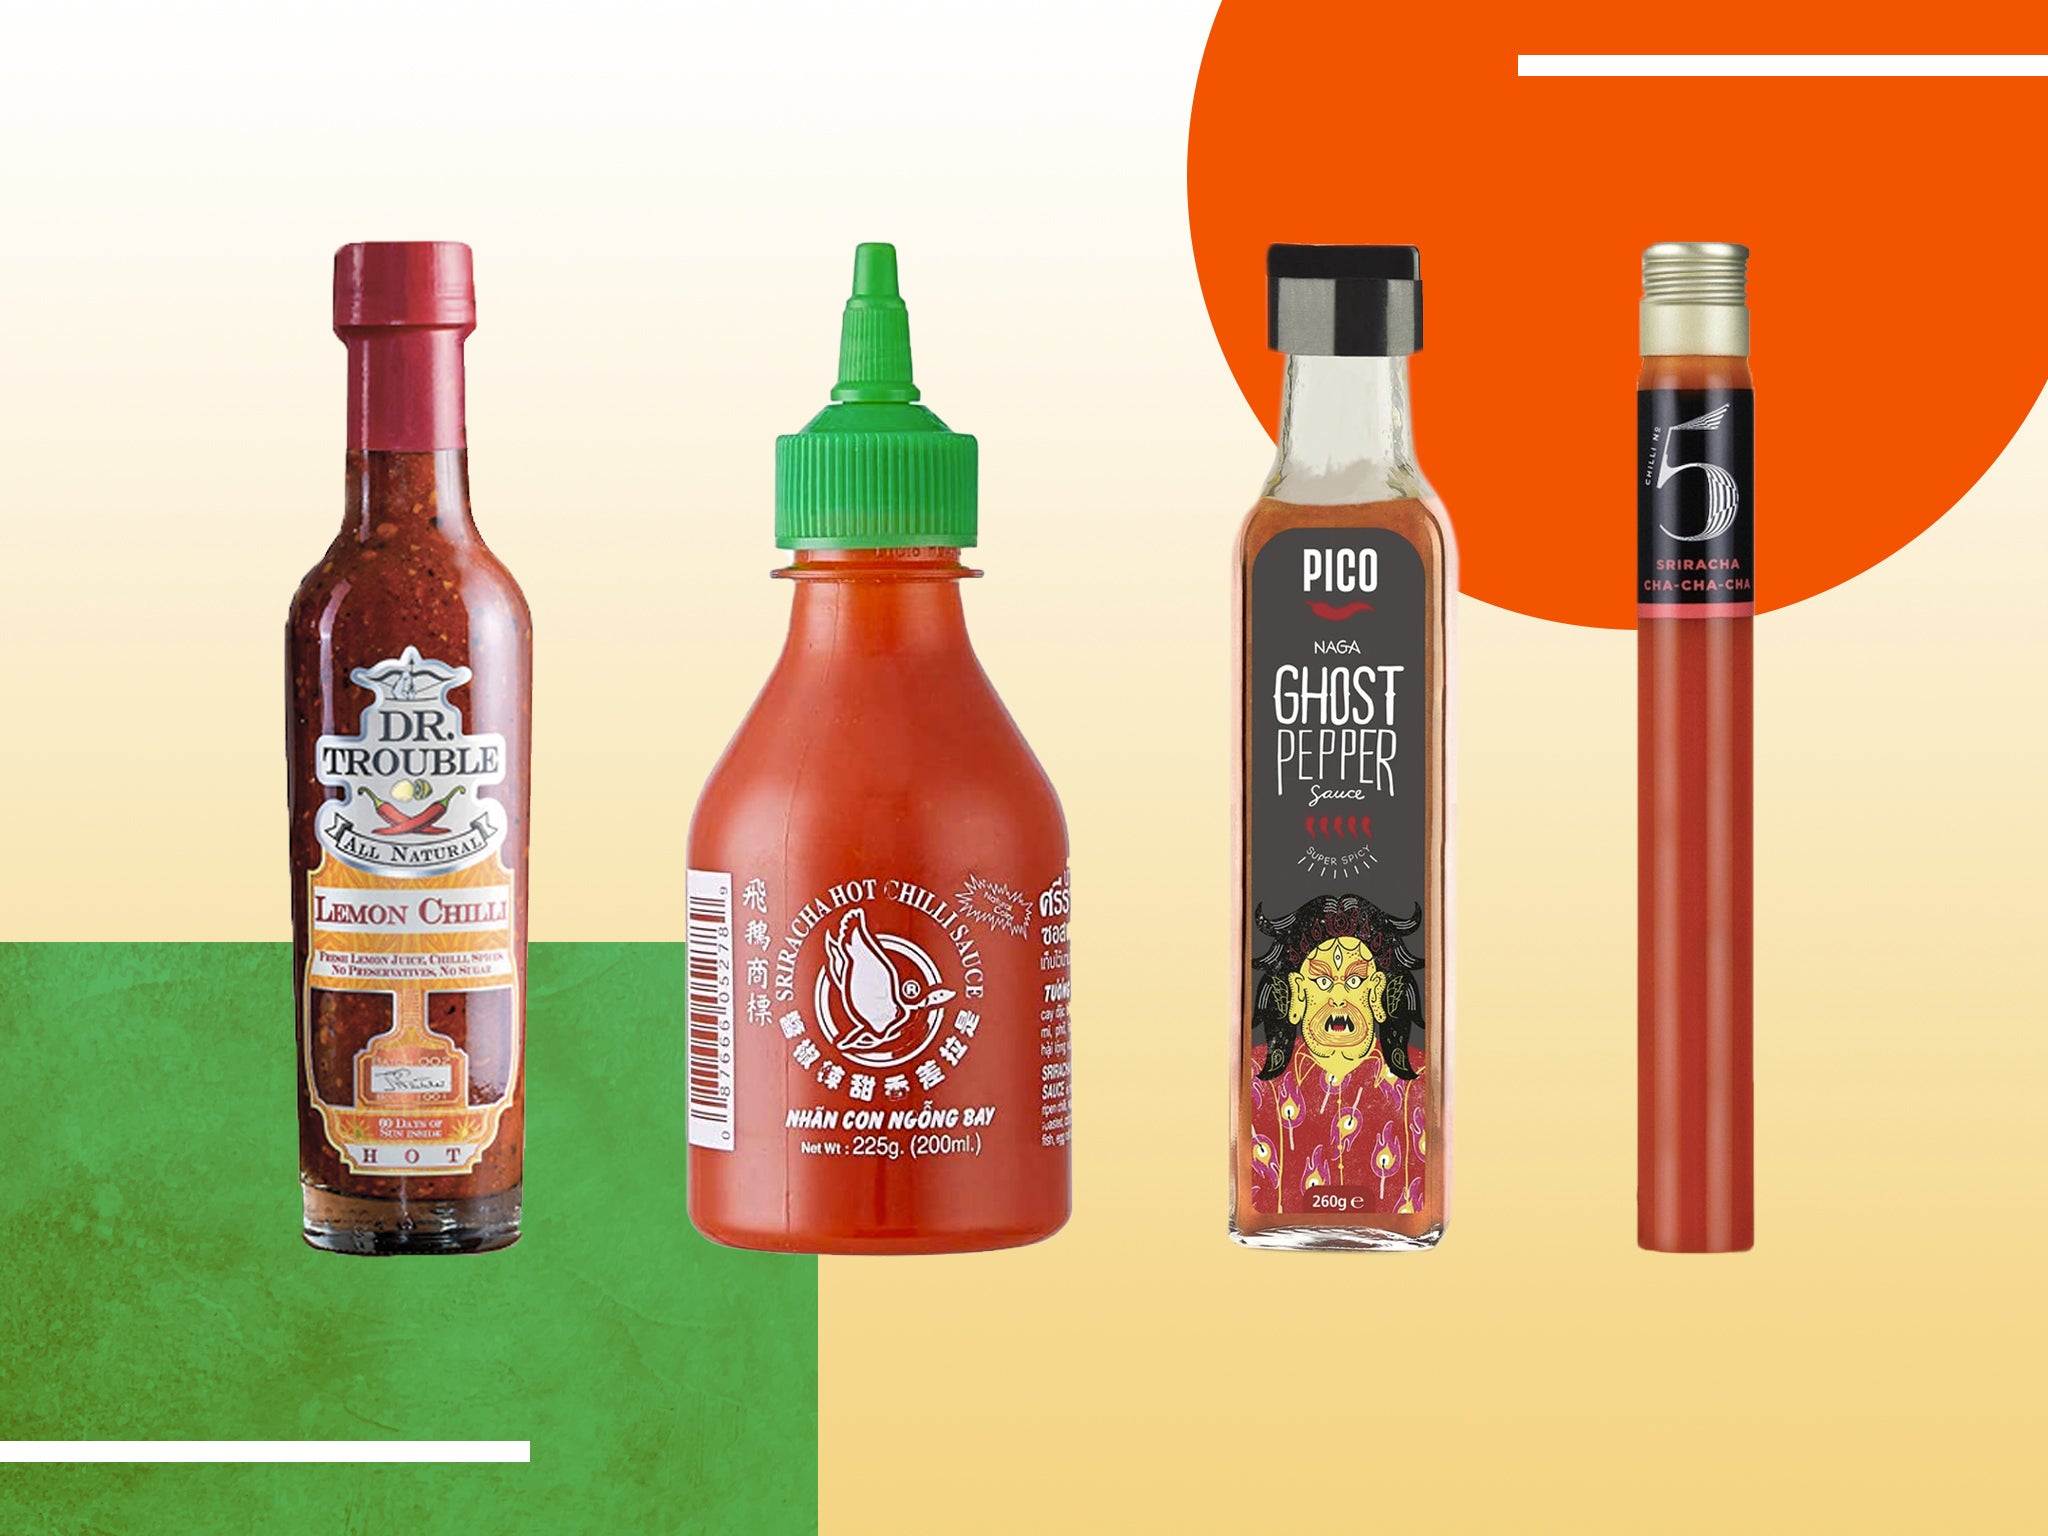 What Is Sriracha Sauce and How Hot Is It Really?